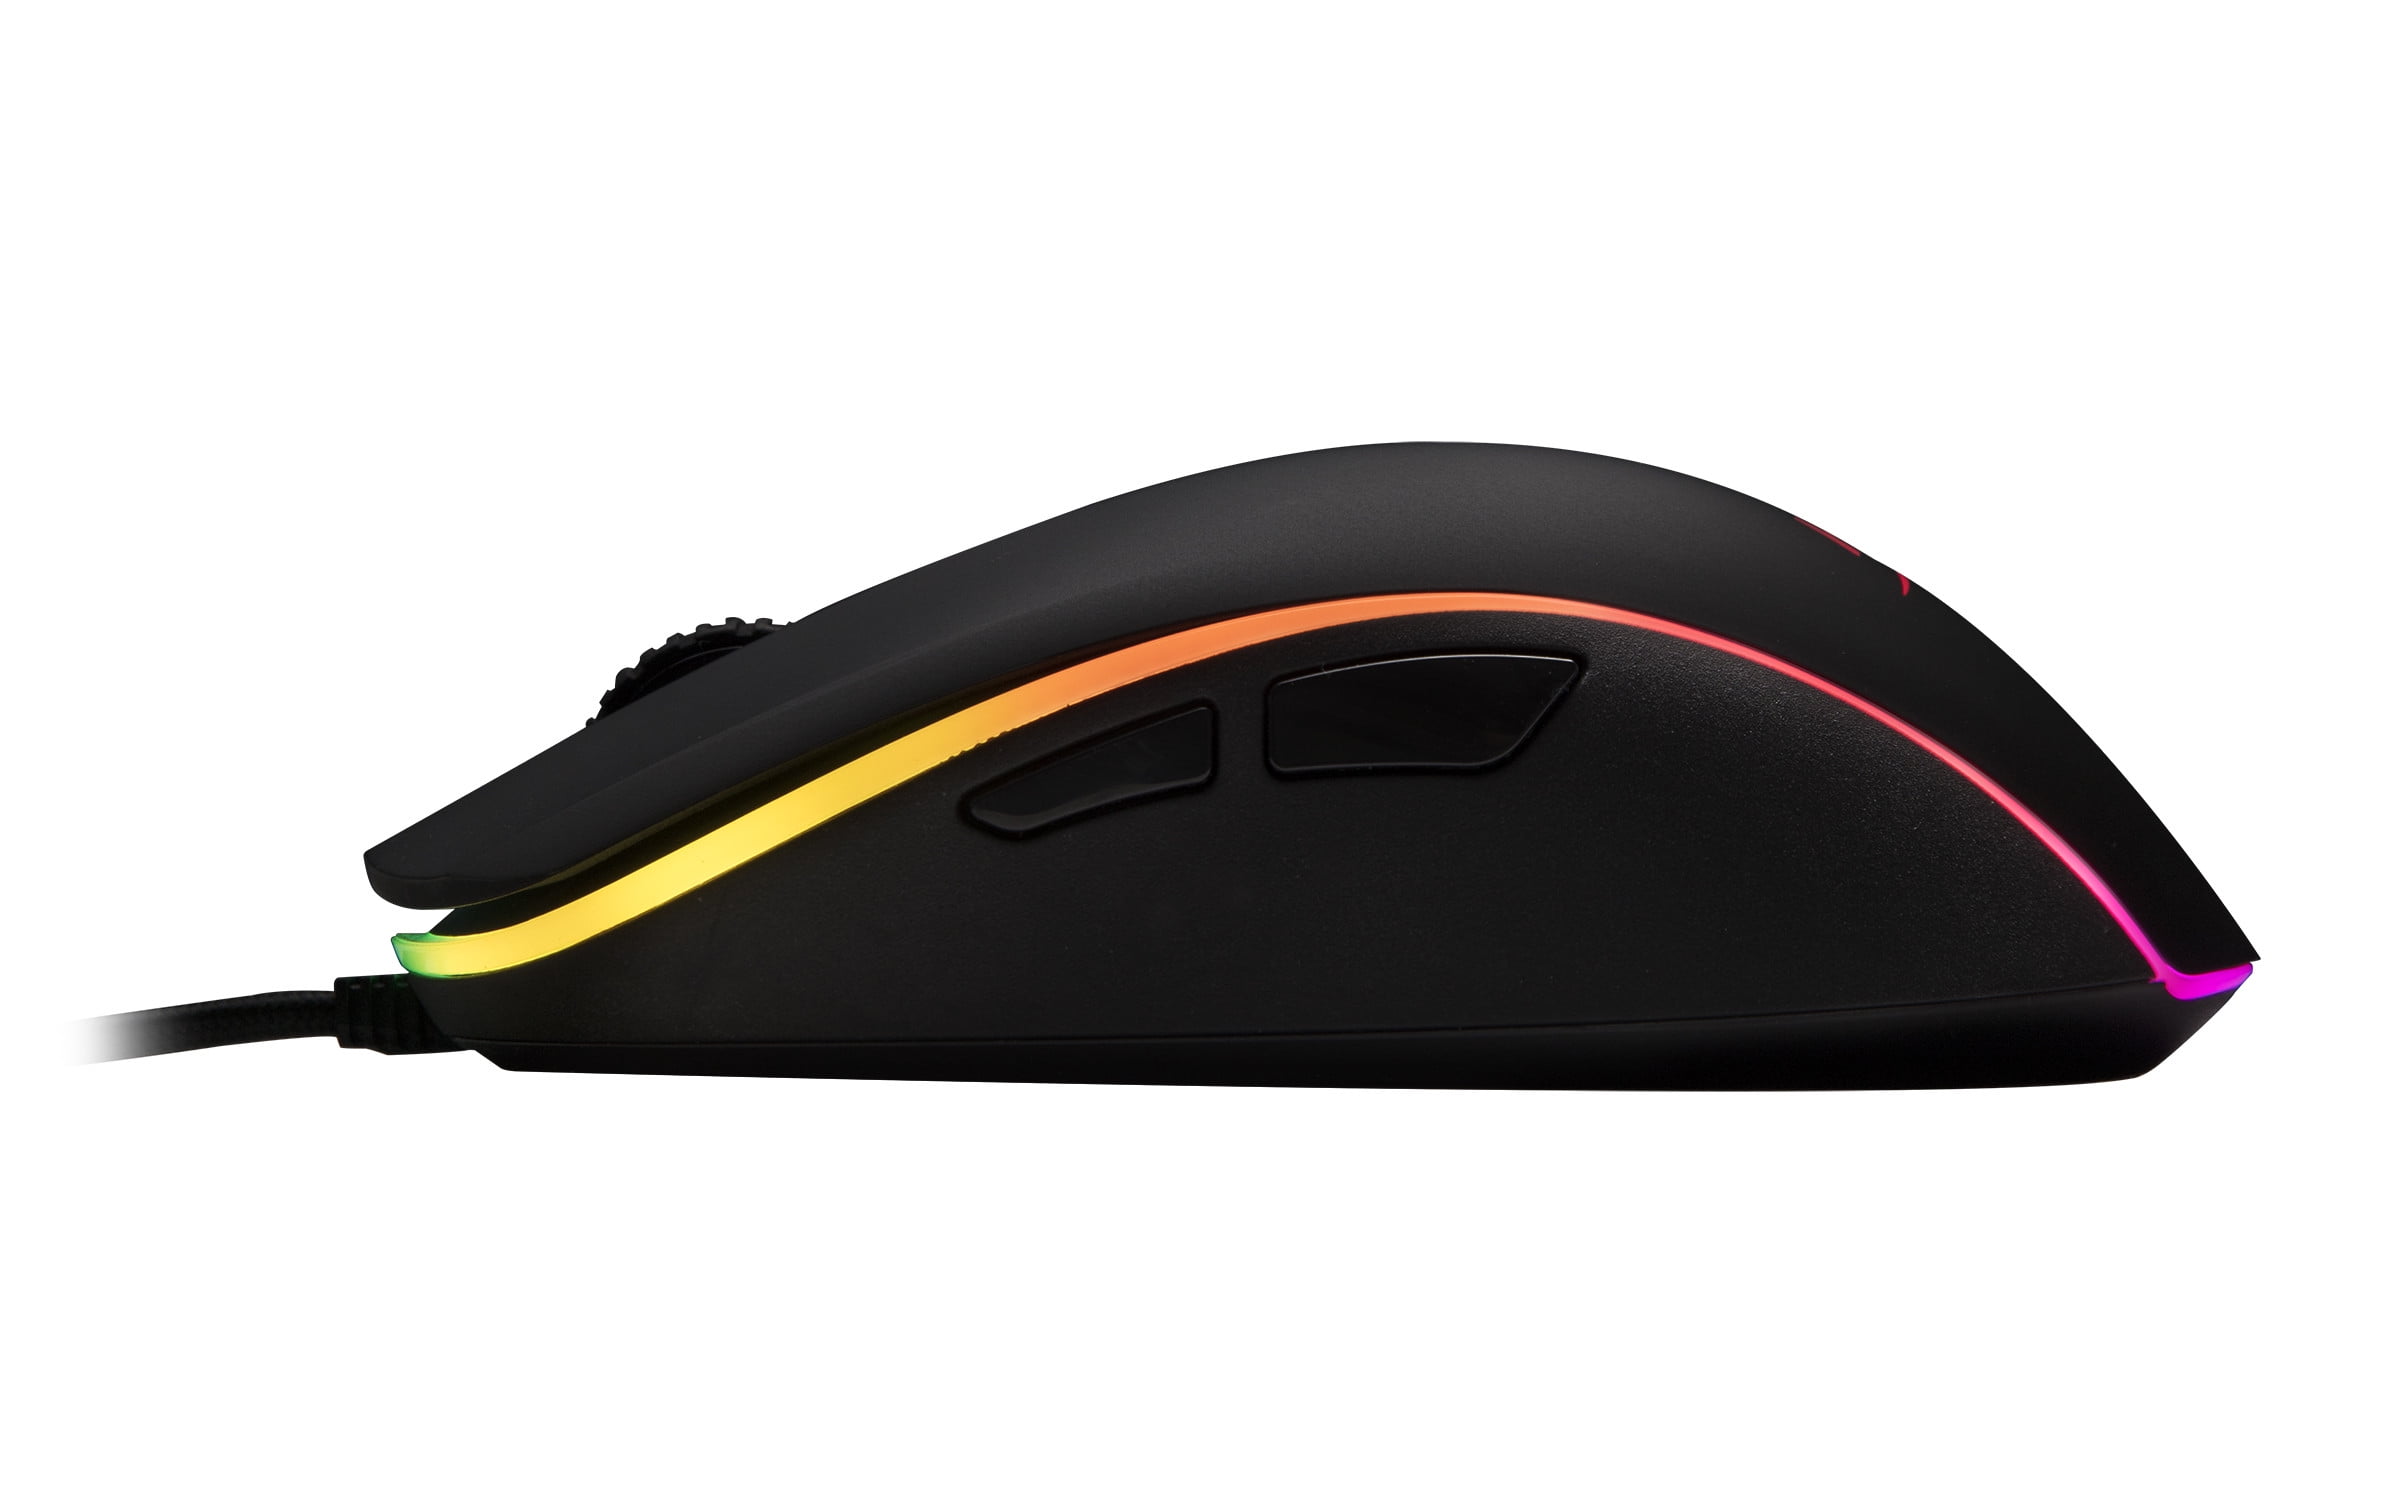 HyperX Pulsefire Surge Gaming Mouse RGB